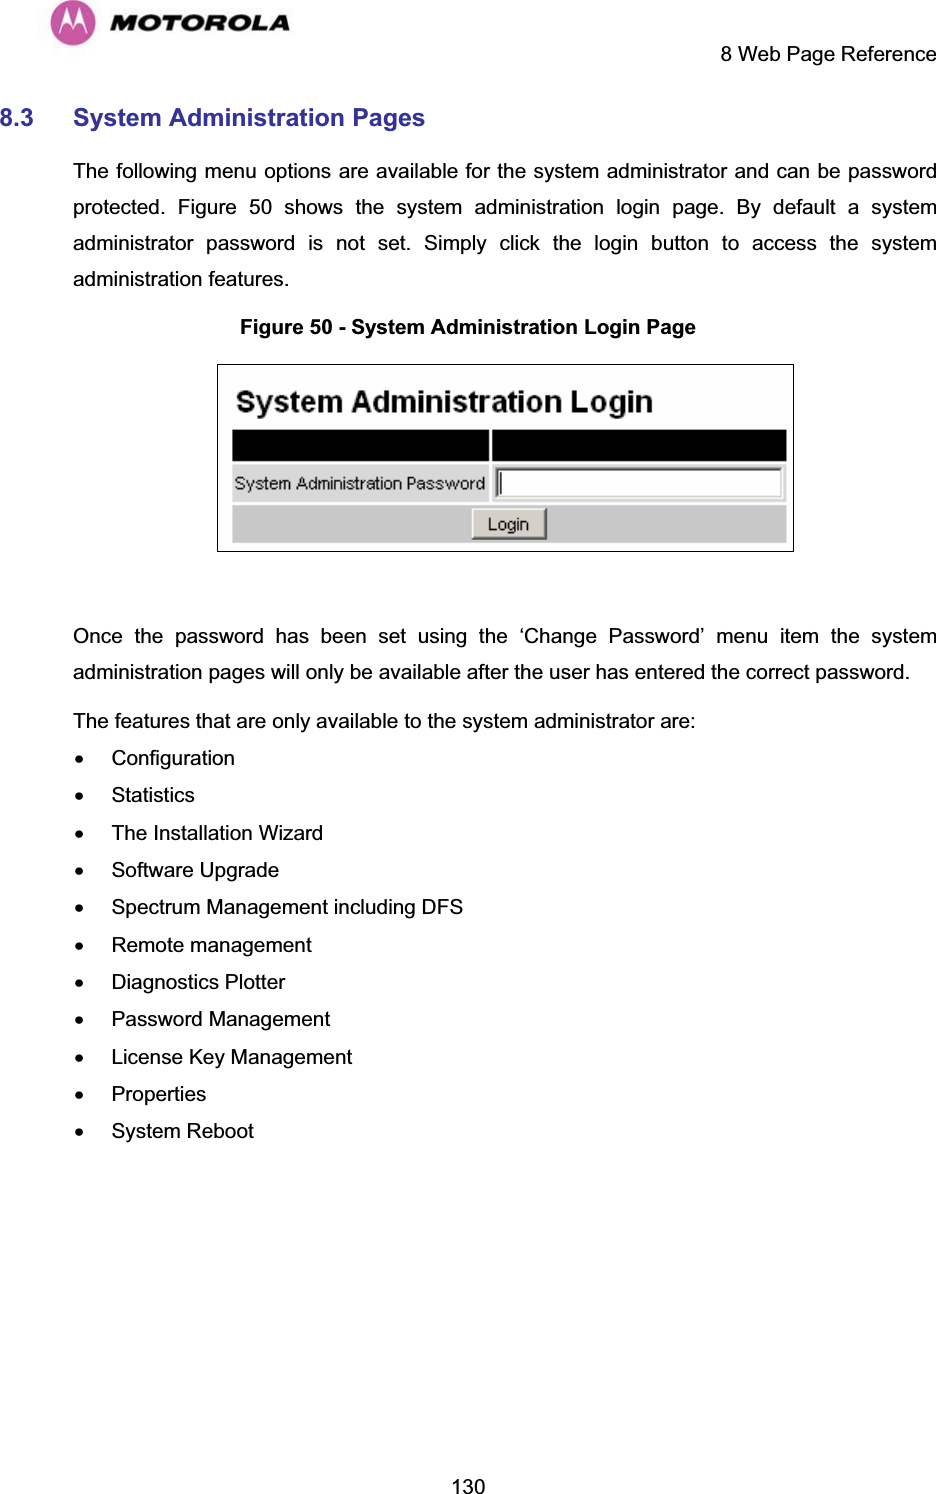     8 Web Page Reference  1308.3 System Administration PagesThe following menu options are available for the system administrator and can be password protected. Figure 50 shows the system administration login page. By default a system administrator password is not set. Simply click the login button to access the system administration features.  Figure 50 - System Administration Login Page   Once the password has been set using the ‘Change Password’ menu item the system administration pages will only be available after the user has entered the correct password. The features that are only available to the system administrator are: x Configuration x Statistics x  The Installation Wizard x Software Upgrade x  Spectrum Management including DFS x Remote management x Diagnostics Plotter x Password Management x  License Key Management x Properties x System Reboot 